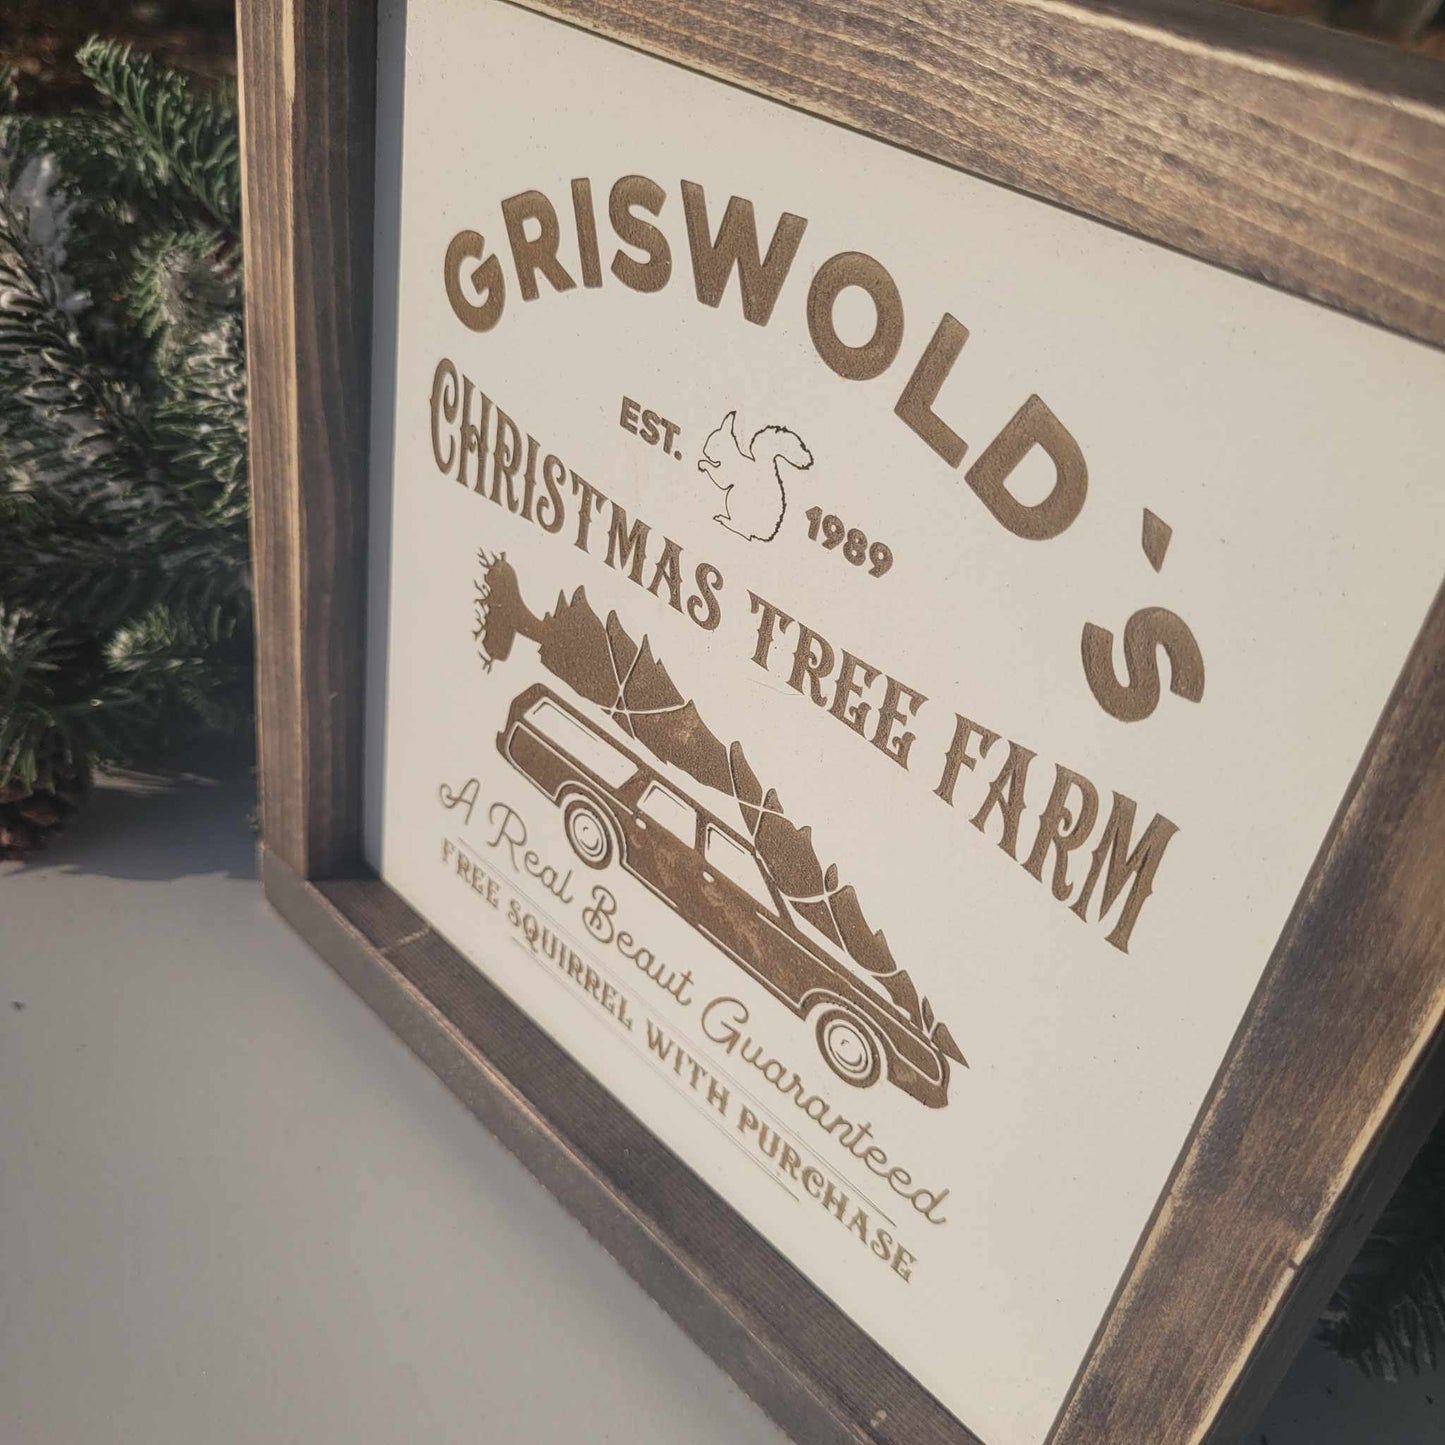 Griswold's Christmas Tree Farm